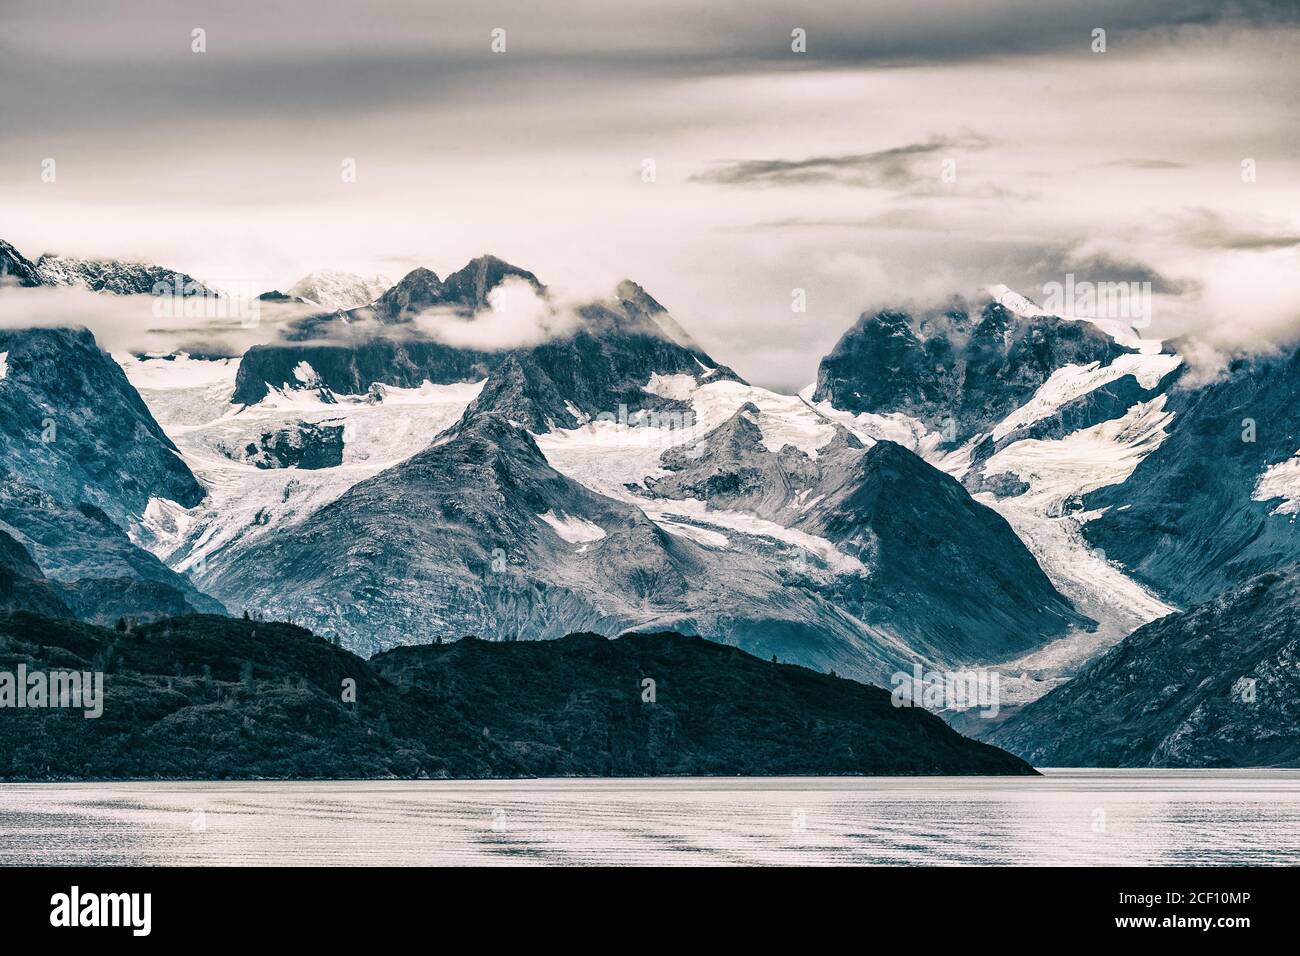 Glacier Bay National Park, Alaska, USA. Alaska scenic cruise travel view of snow capped mountains at sunset. Beautiful snowy mountain peaks landscape Stock Photo